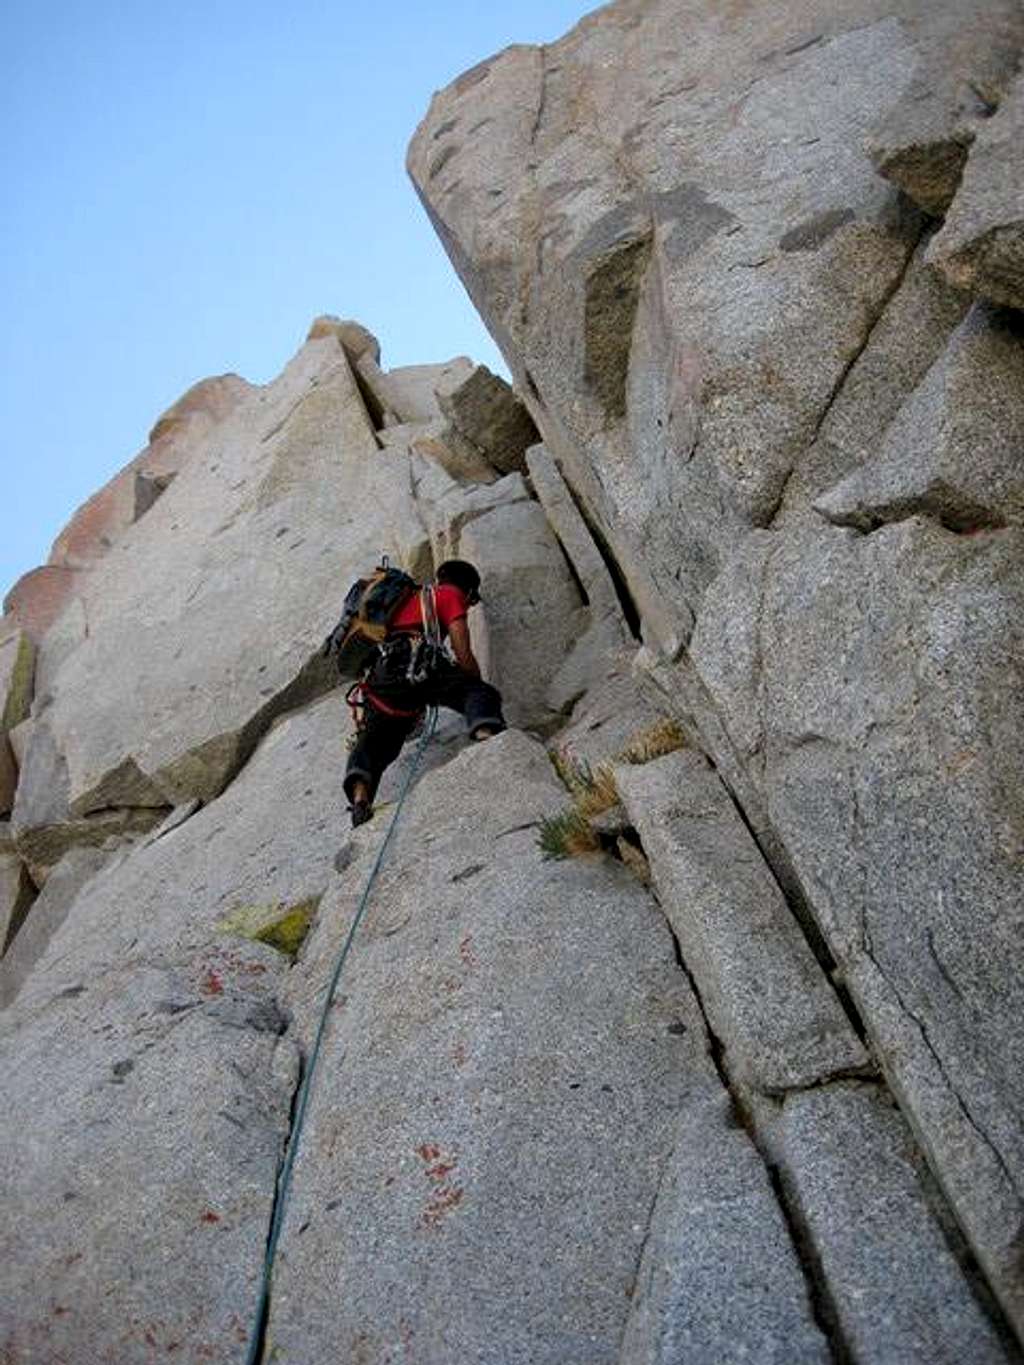 Marty on the last pitch (#7)